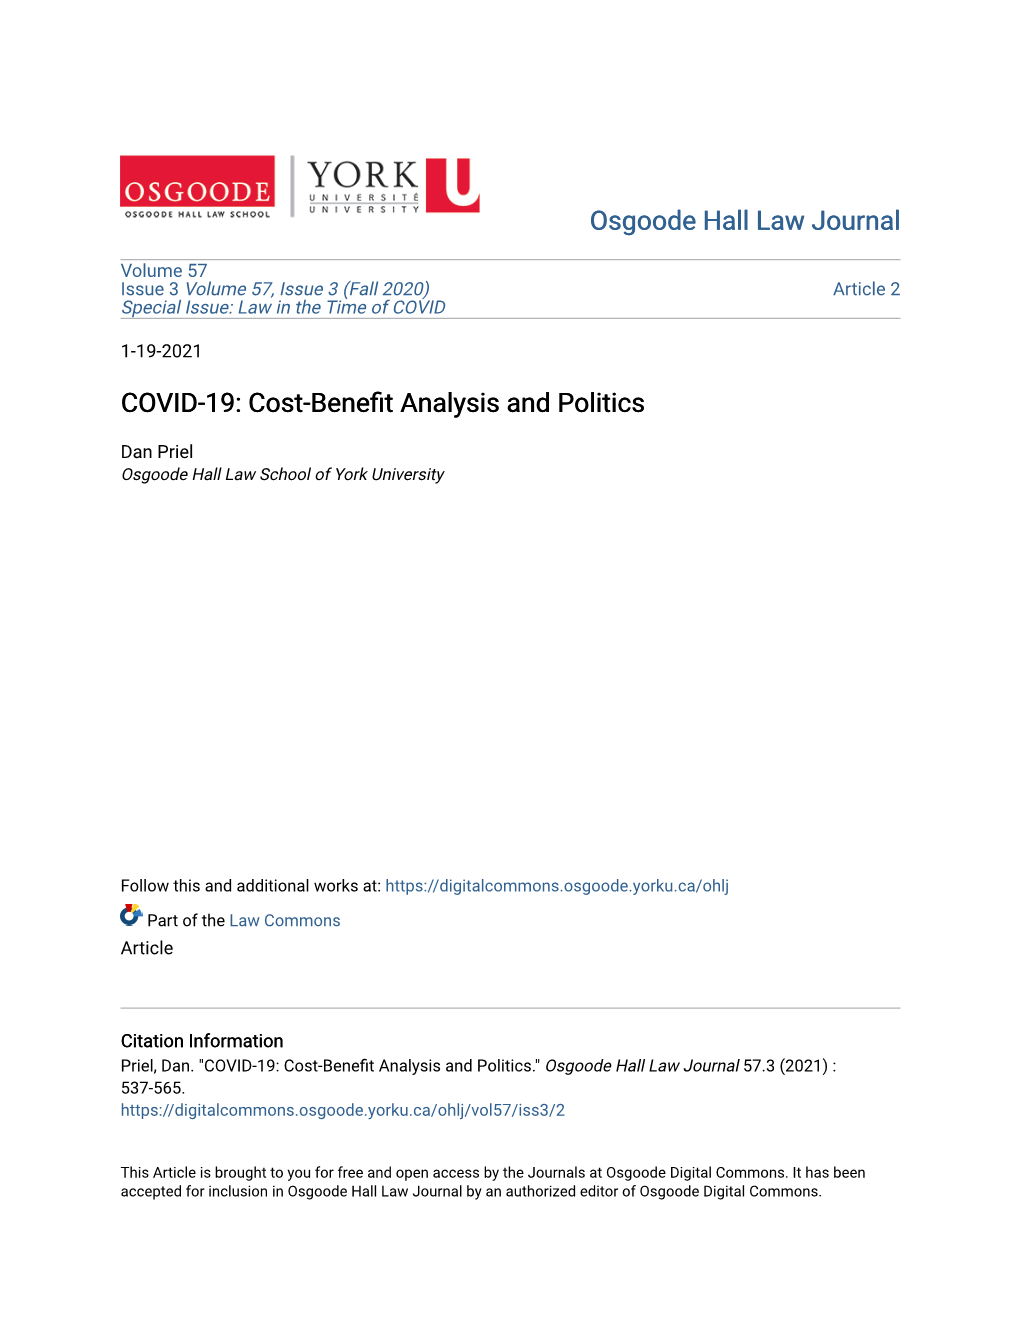 COVID-19: Cost-Benefit Analysis and Politics." Osgoode Hall Law Journal 57.3 (2021) : 537-565